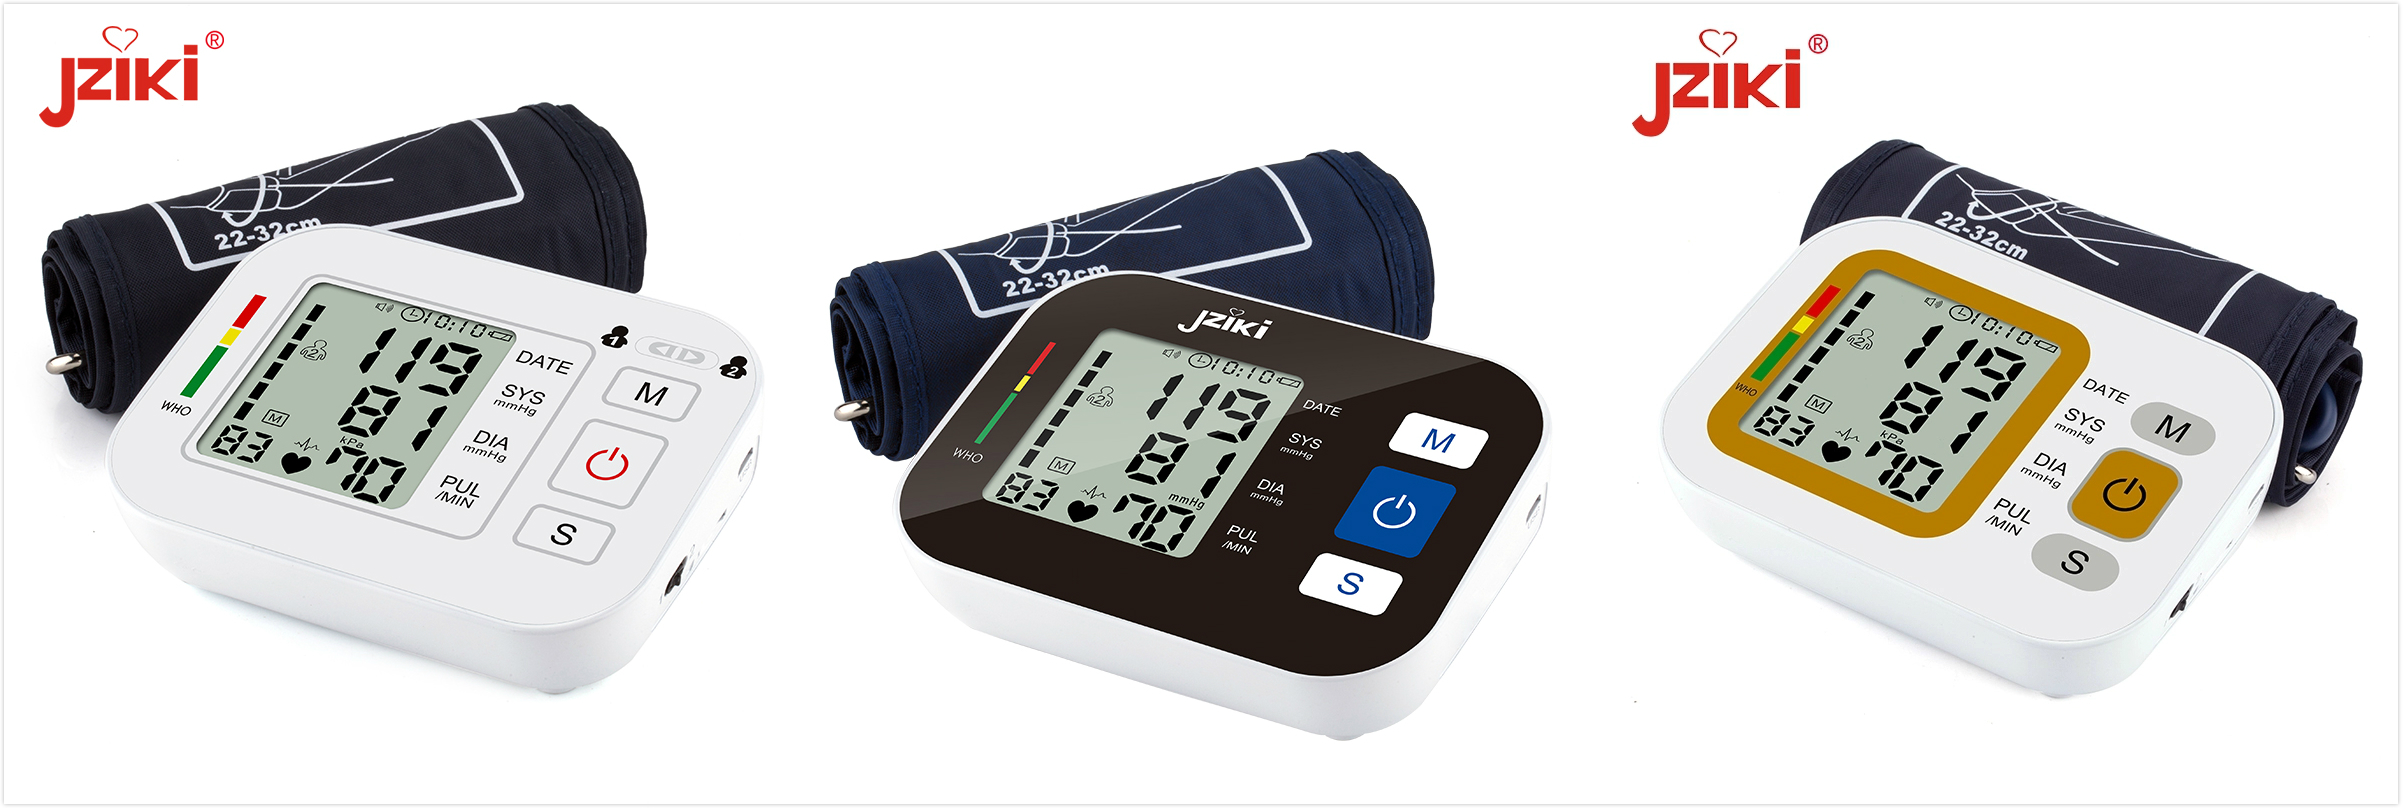 JZIKI 2020 Health monitoring devices digital electronic blood pressure monitors with usb